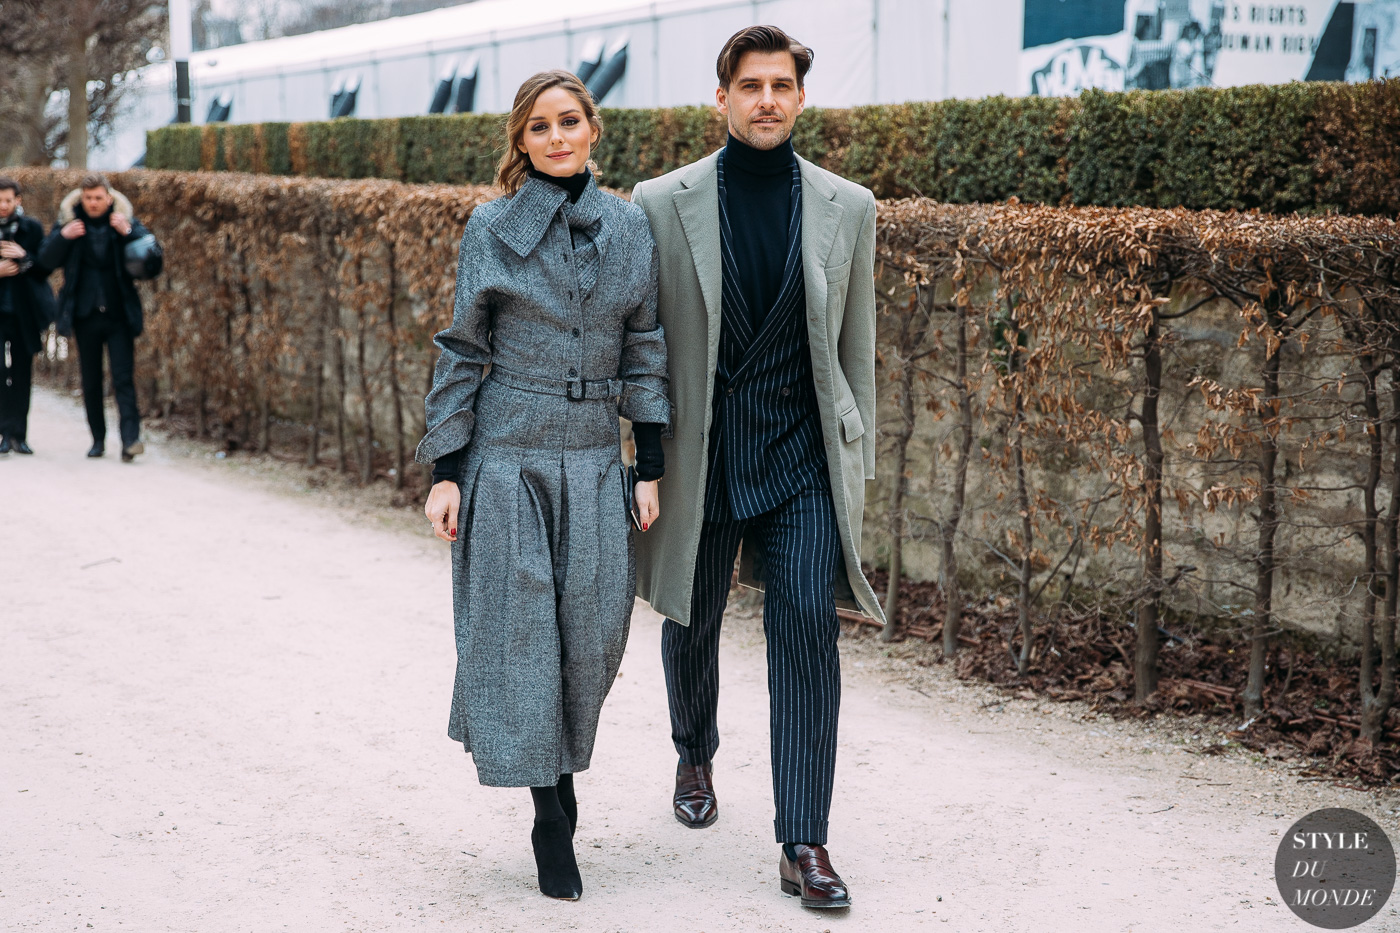 Olivia Palermo and Johannes Huebl by STYLEDUMONDE Street Style Fashion Photography FW18 20180227_48A5564